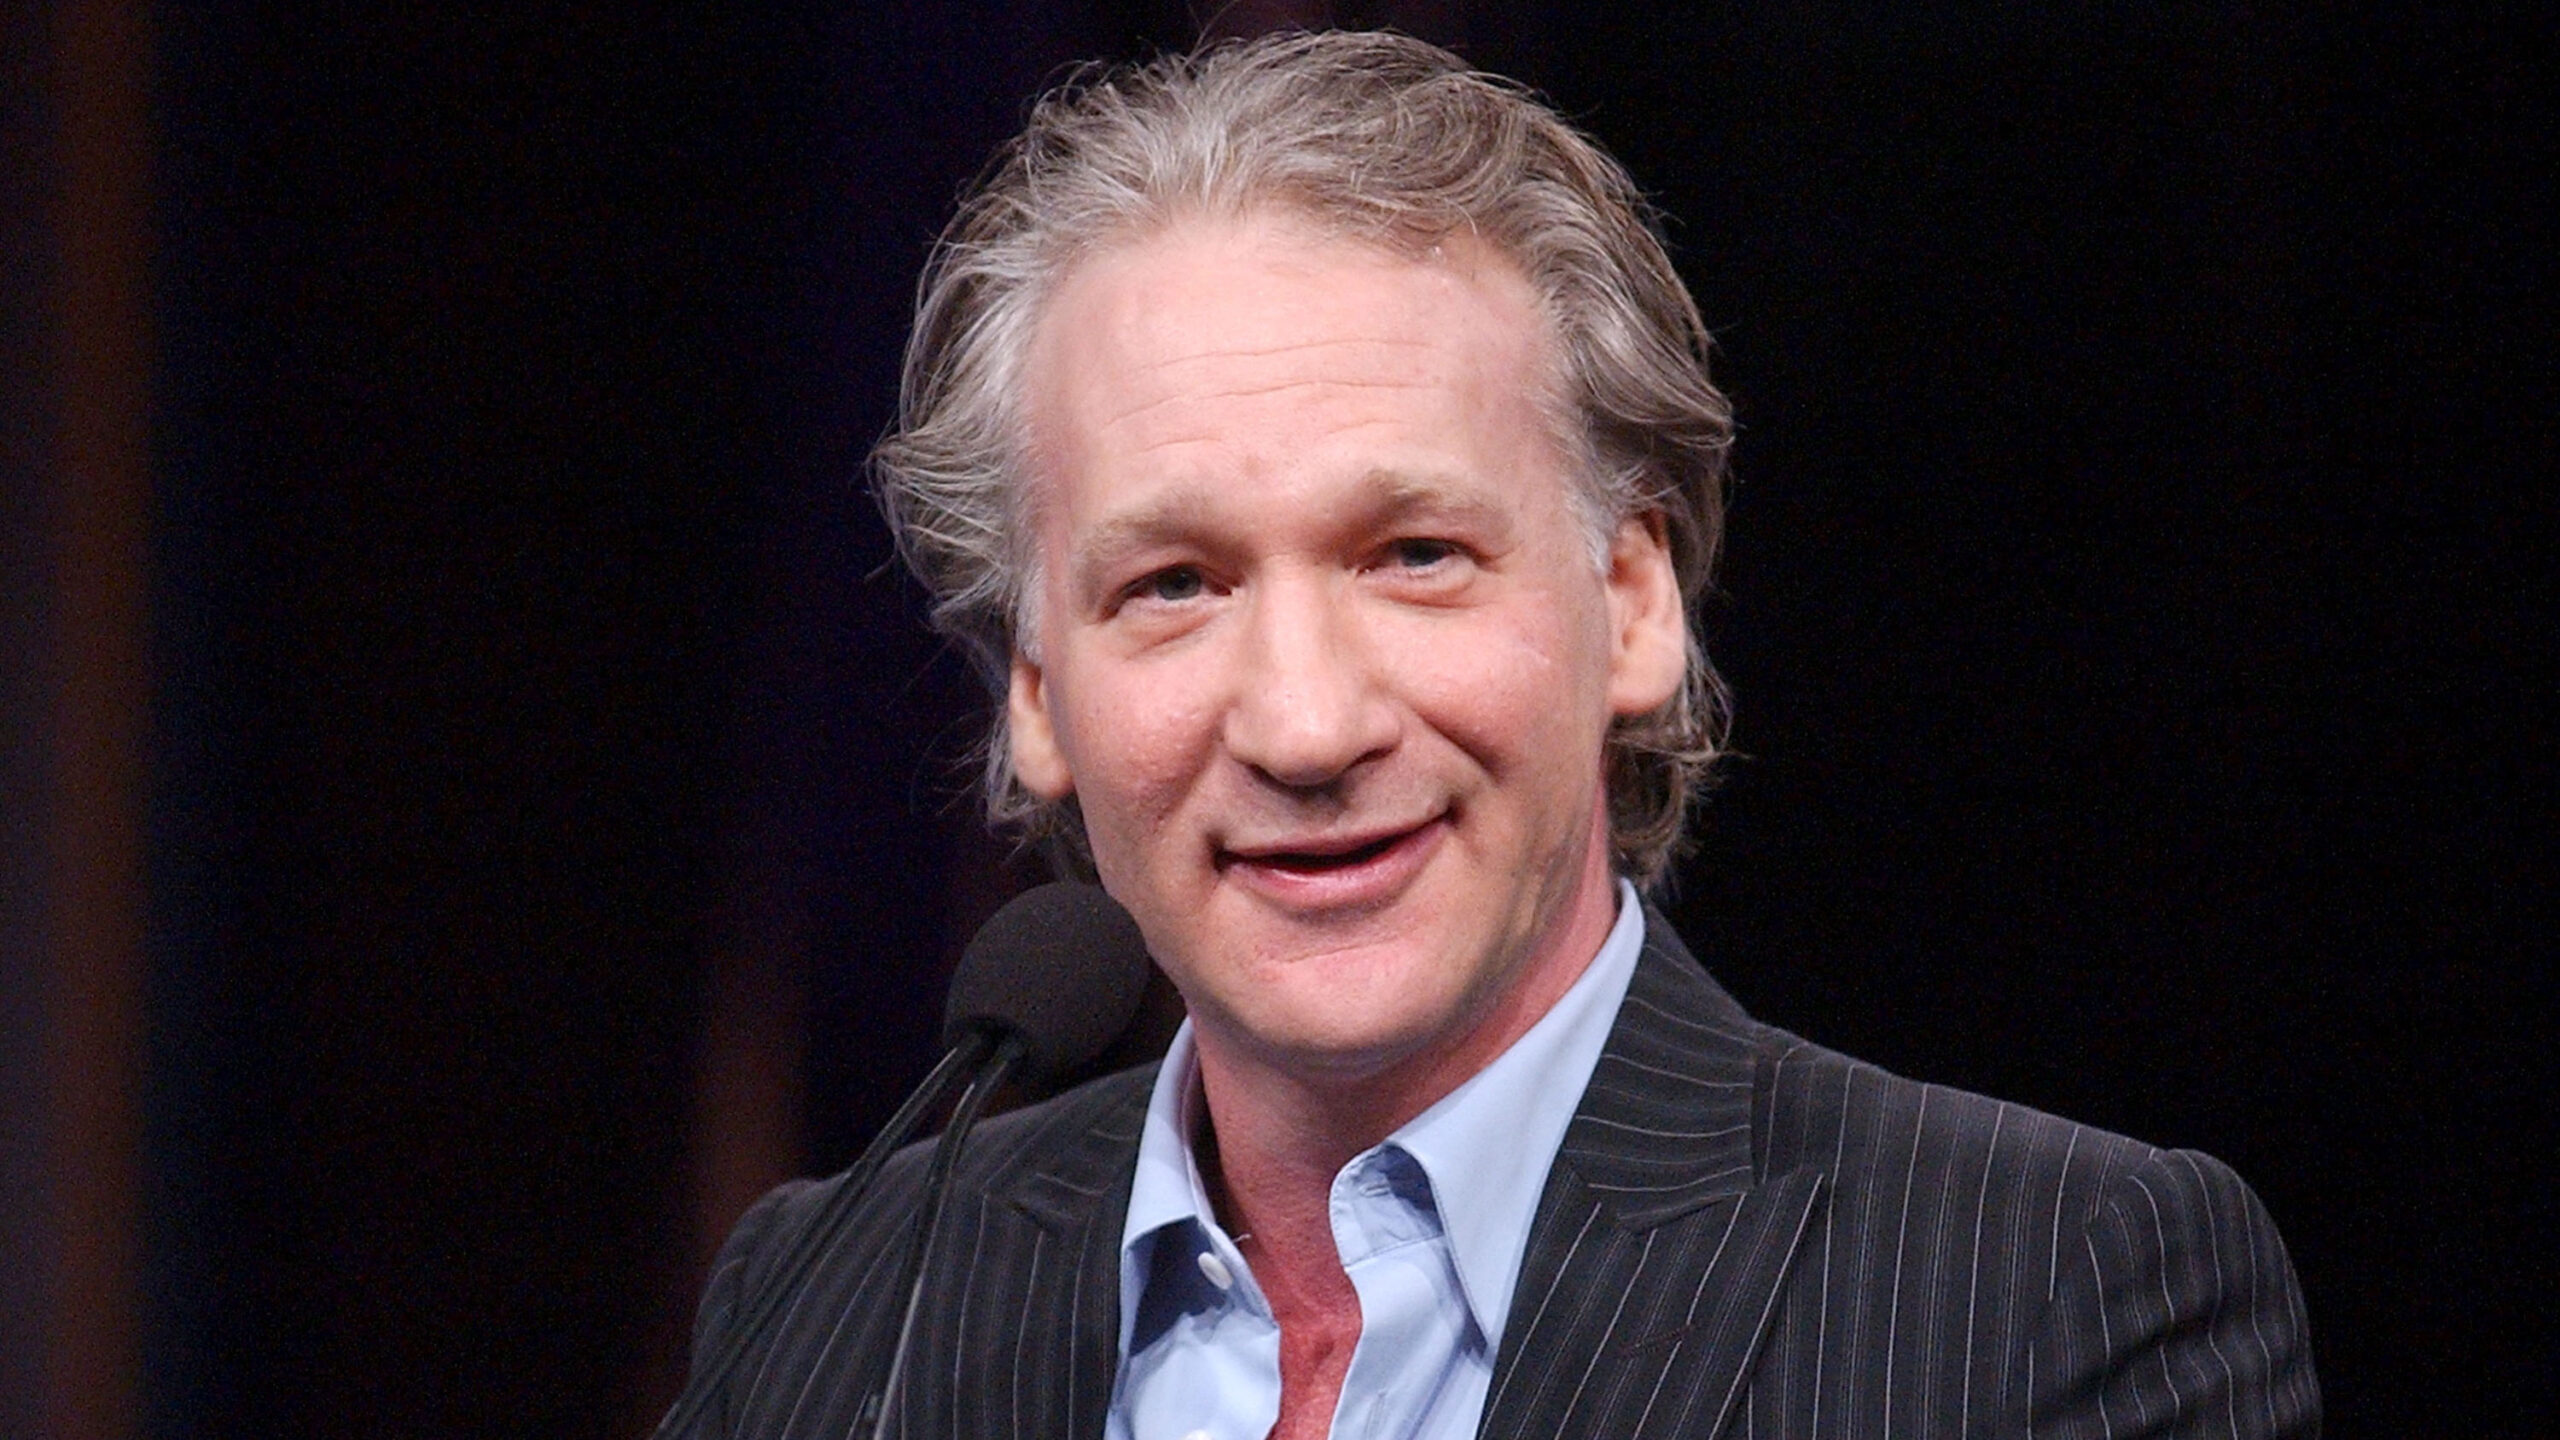 Bill Maher slams ‘Barbie’ movie for being preachy and man-hating.